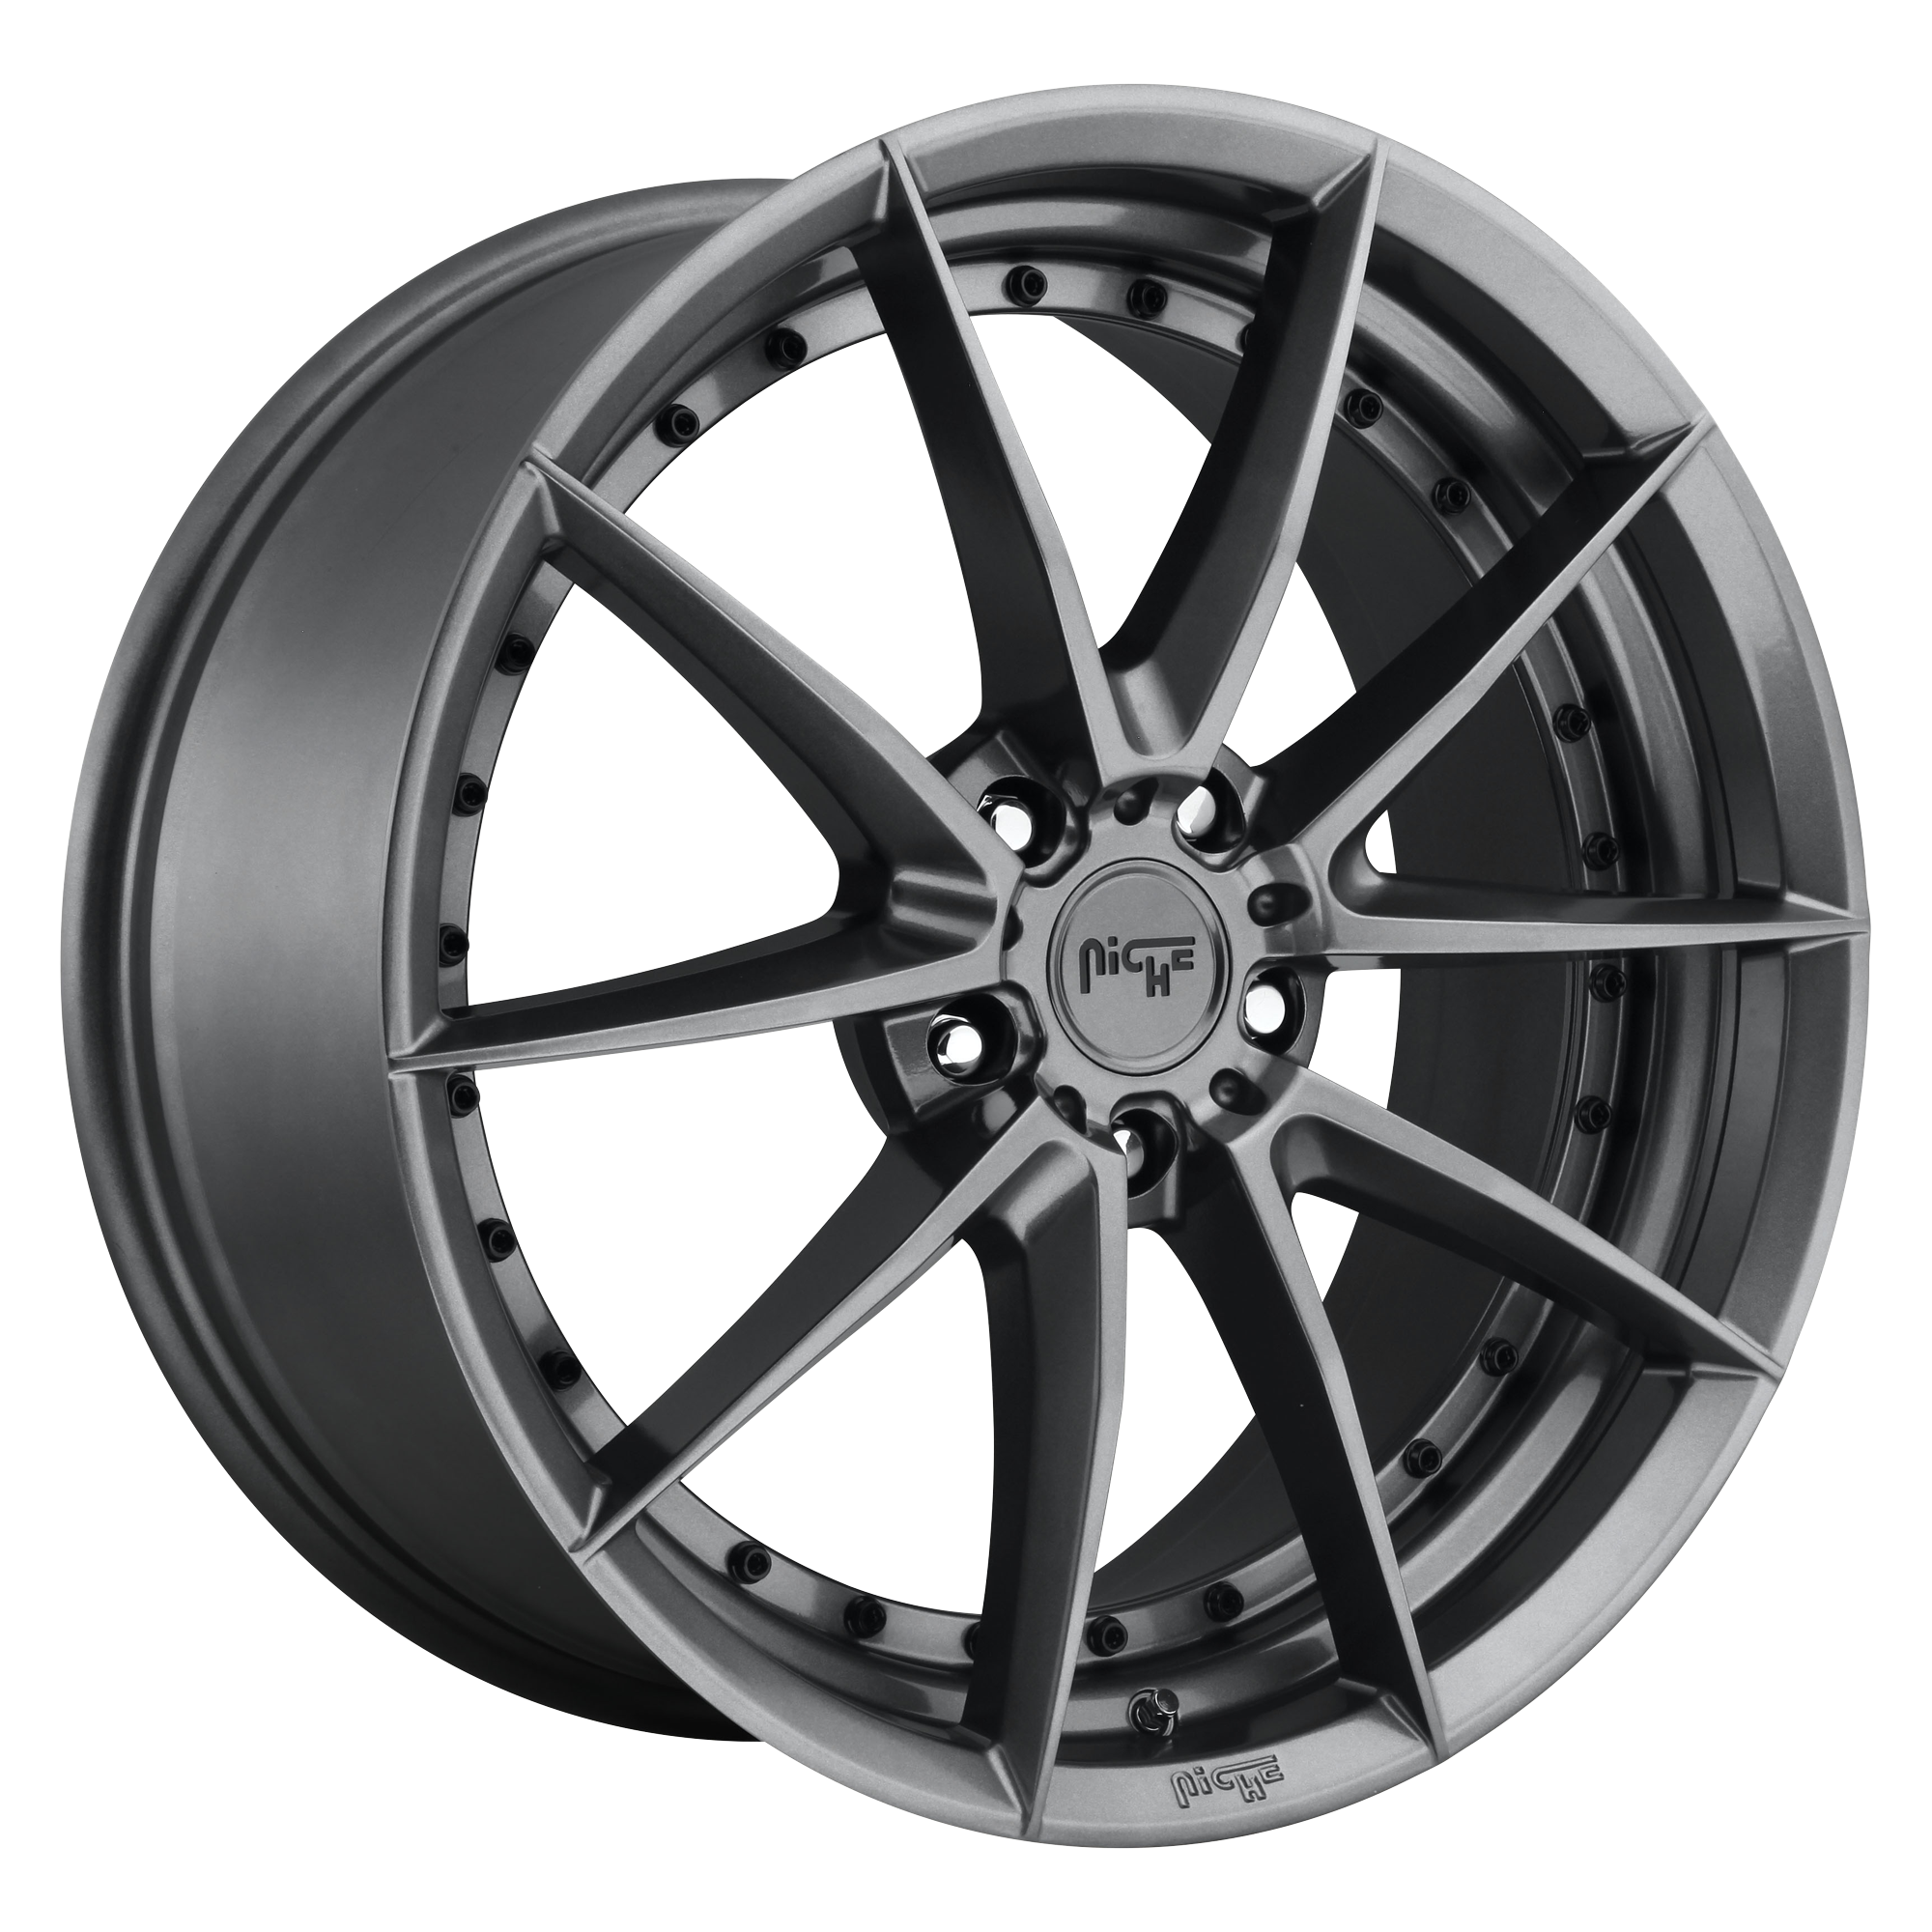 SECTOR 20x9 5x114.30 GLOSS ANTHRACITE (35 mm) - Tires and Engine Performance